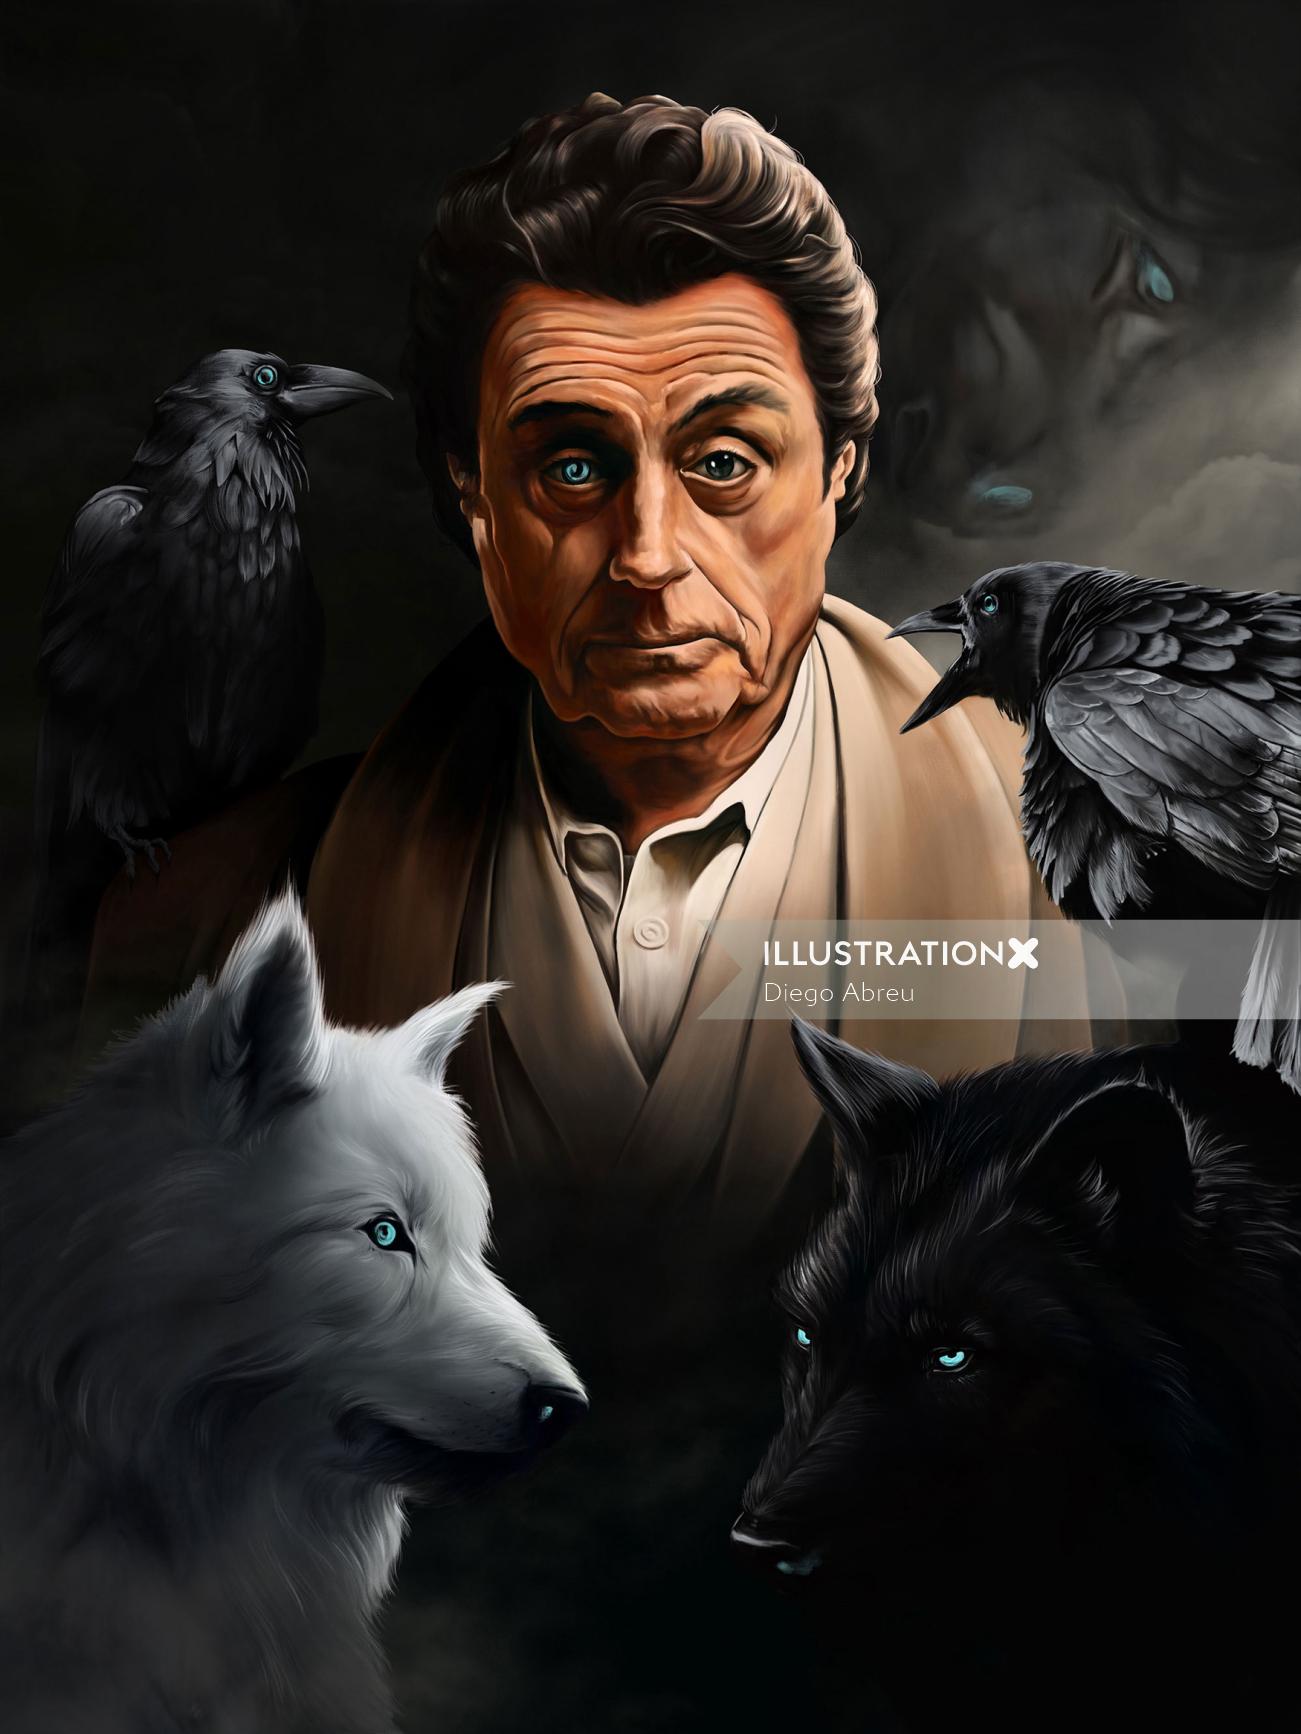 Mr. Wednesday, by Ian McShane for American Gods series